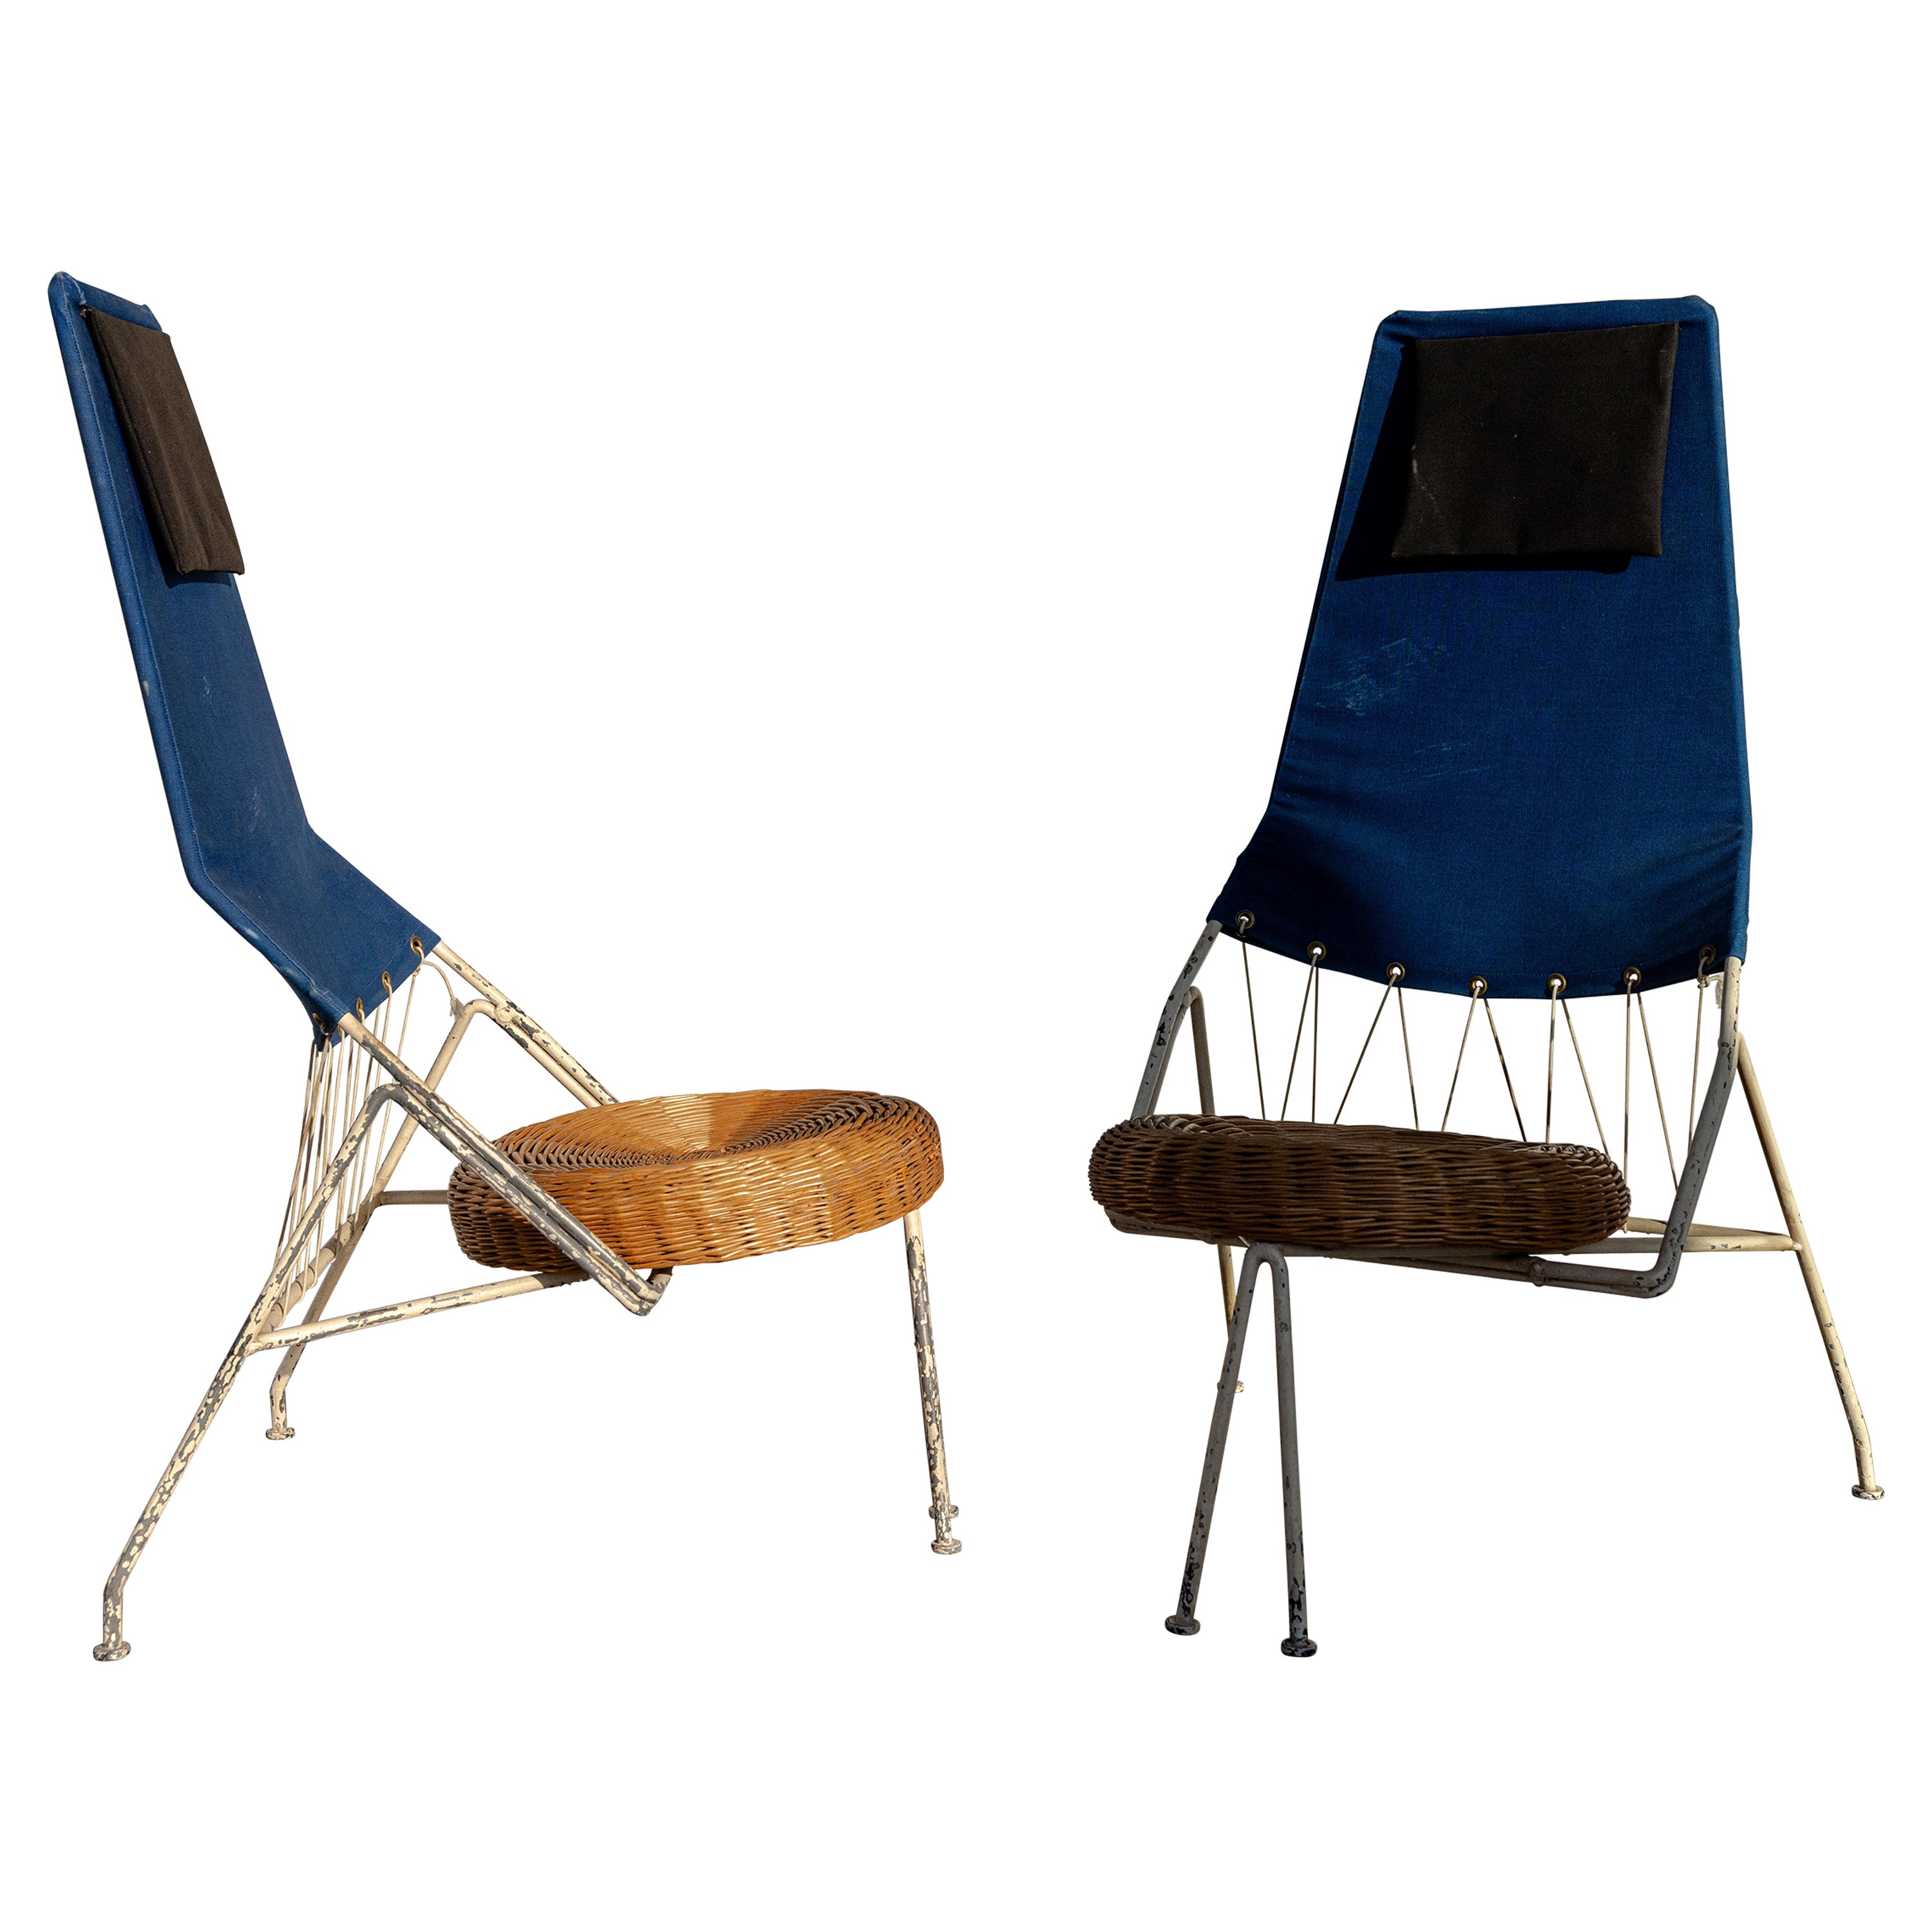 Pair of Triangular Midcentury Lounge Chairs by Tony Paul For Sale